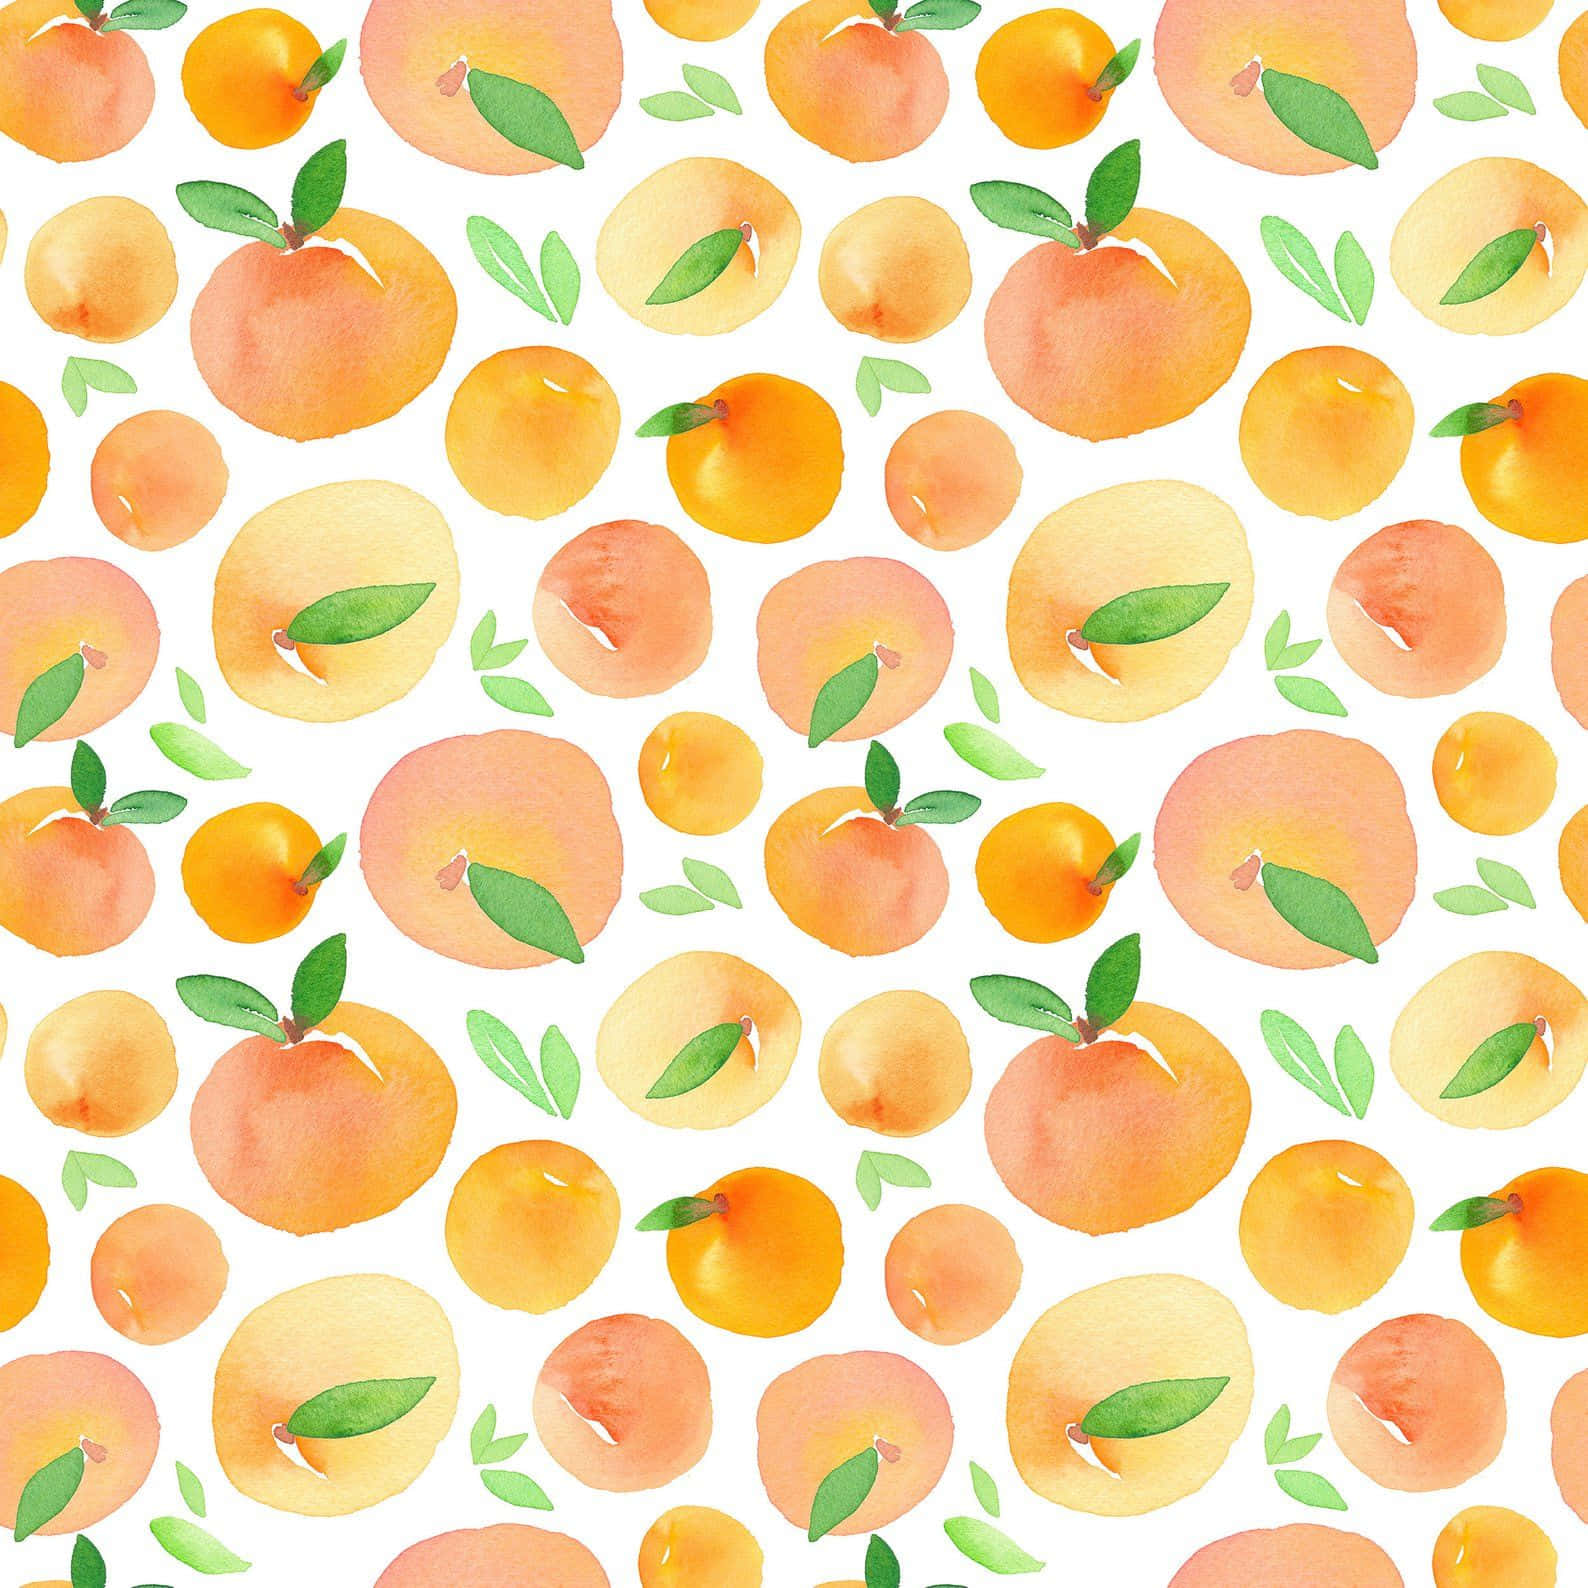 Cute Fruit Background Images HD Pictures and Wallpaper For Free Download   Pngtree